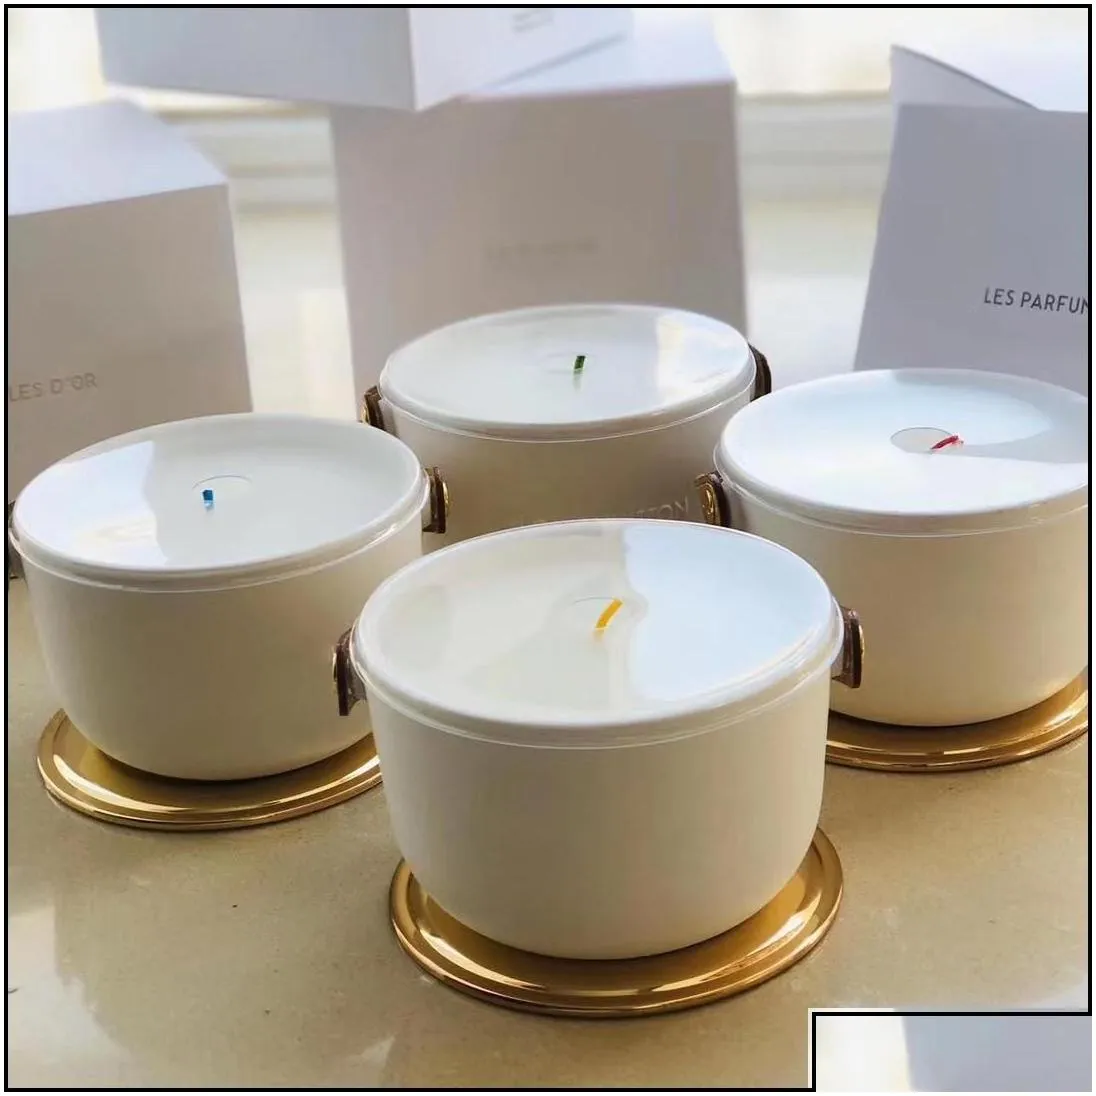 car air freshener aromatherapy iv per candle fragrance 220g dehors ii neige feuilles dor lle blanche lair du jardin with sealed gift